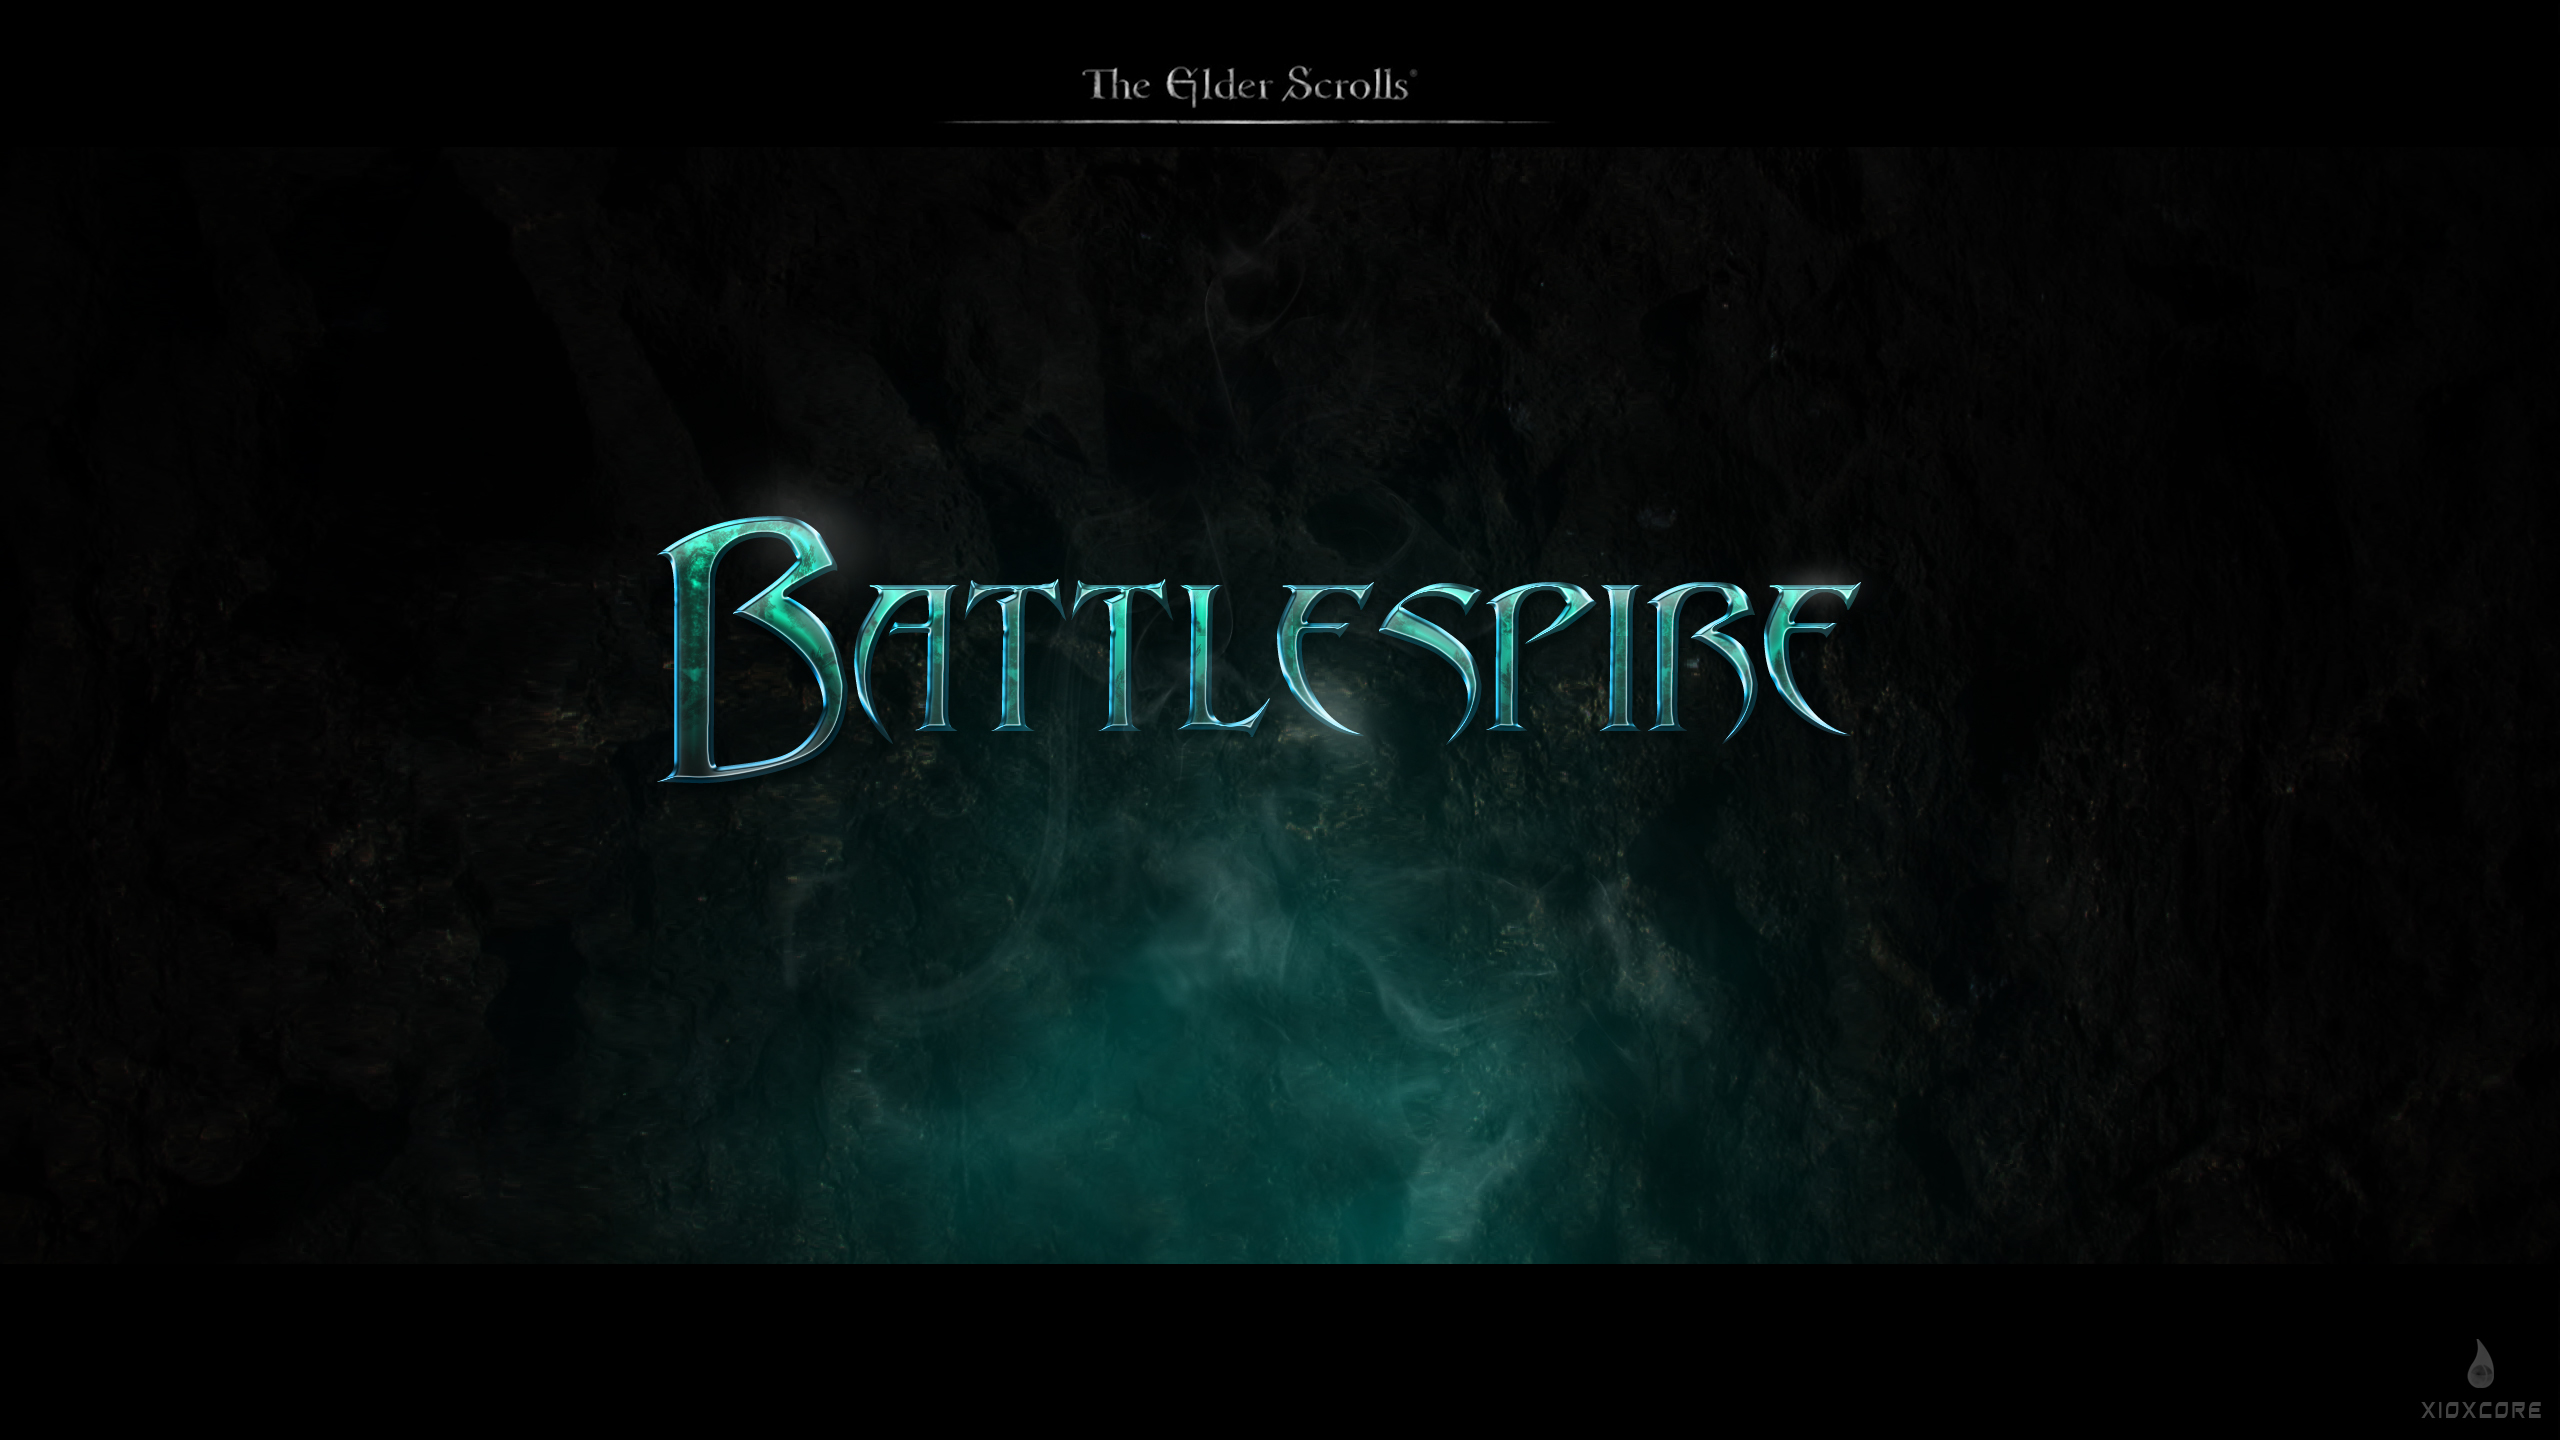 Battlespire Style and Wallpaper -FREE-